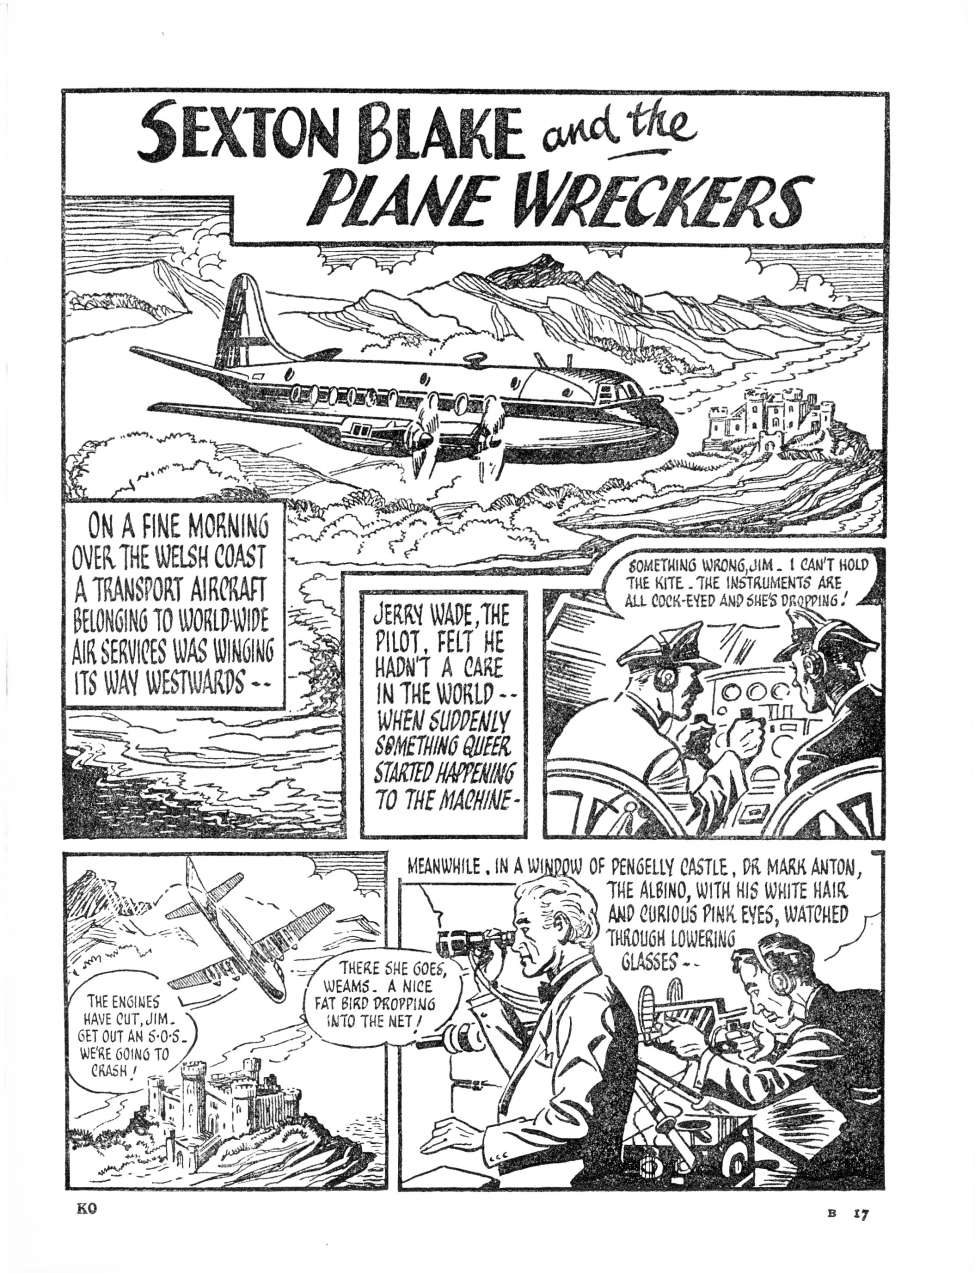 Comic Book Cover For Sexton Blake - The Plane Wreckers 1954